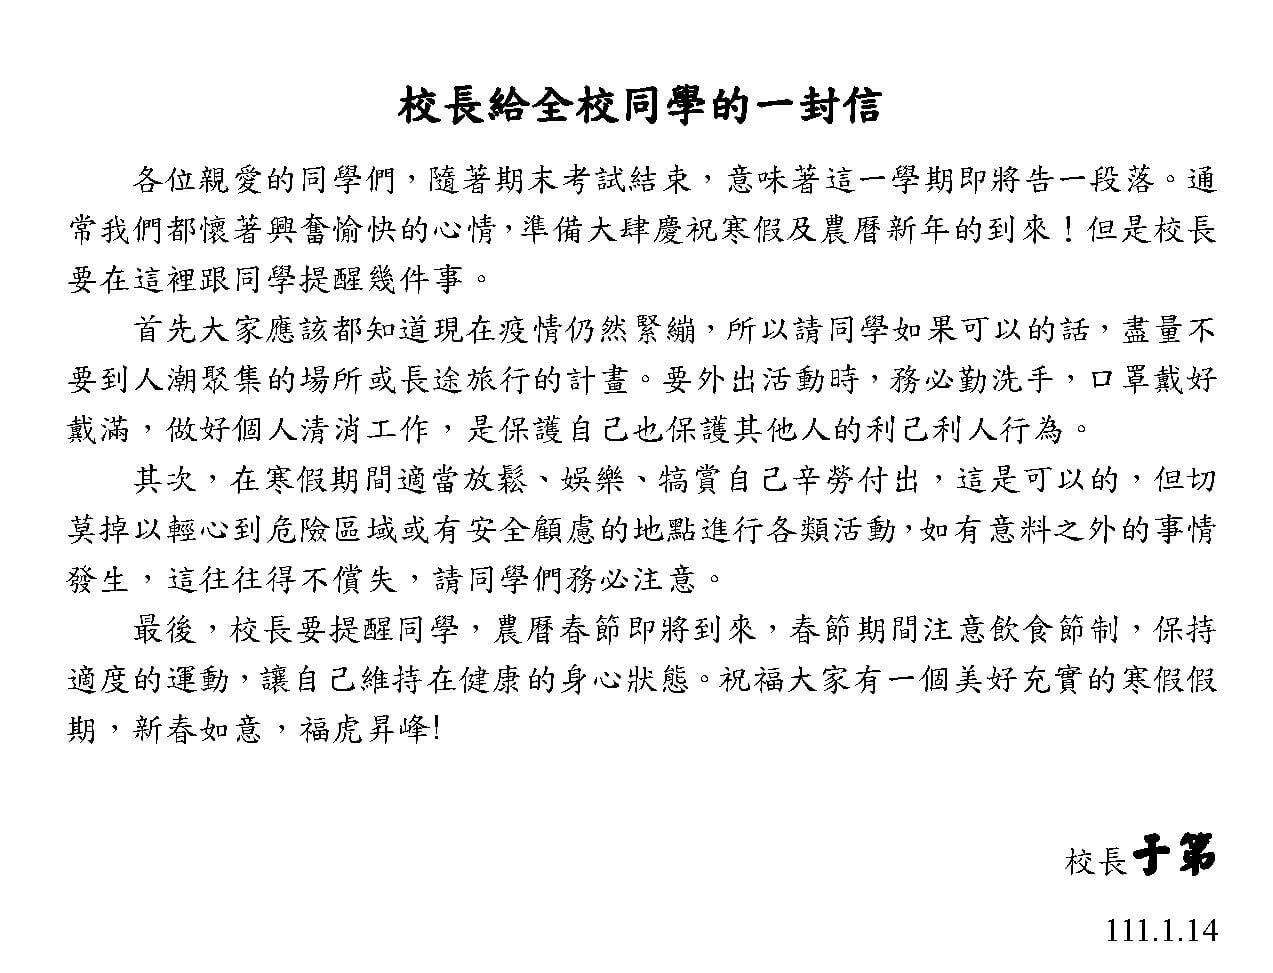 A letter from Ti Yu, the president of JUST, to our classmates!